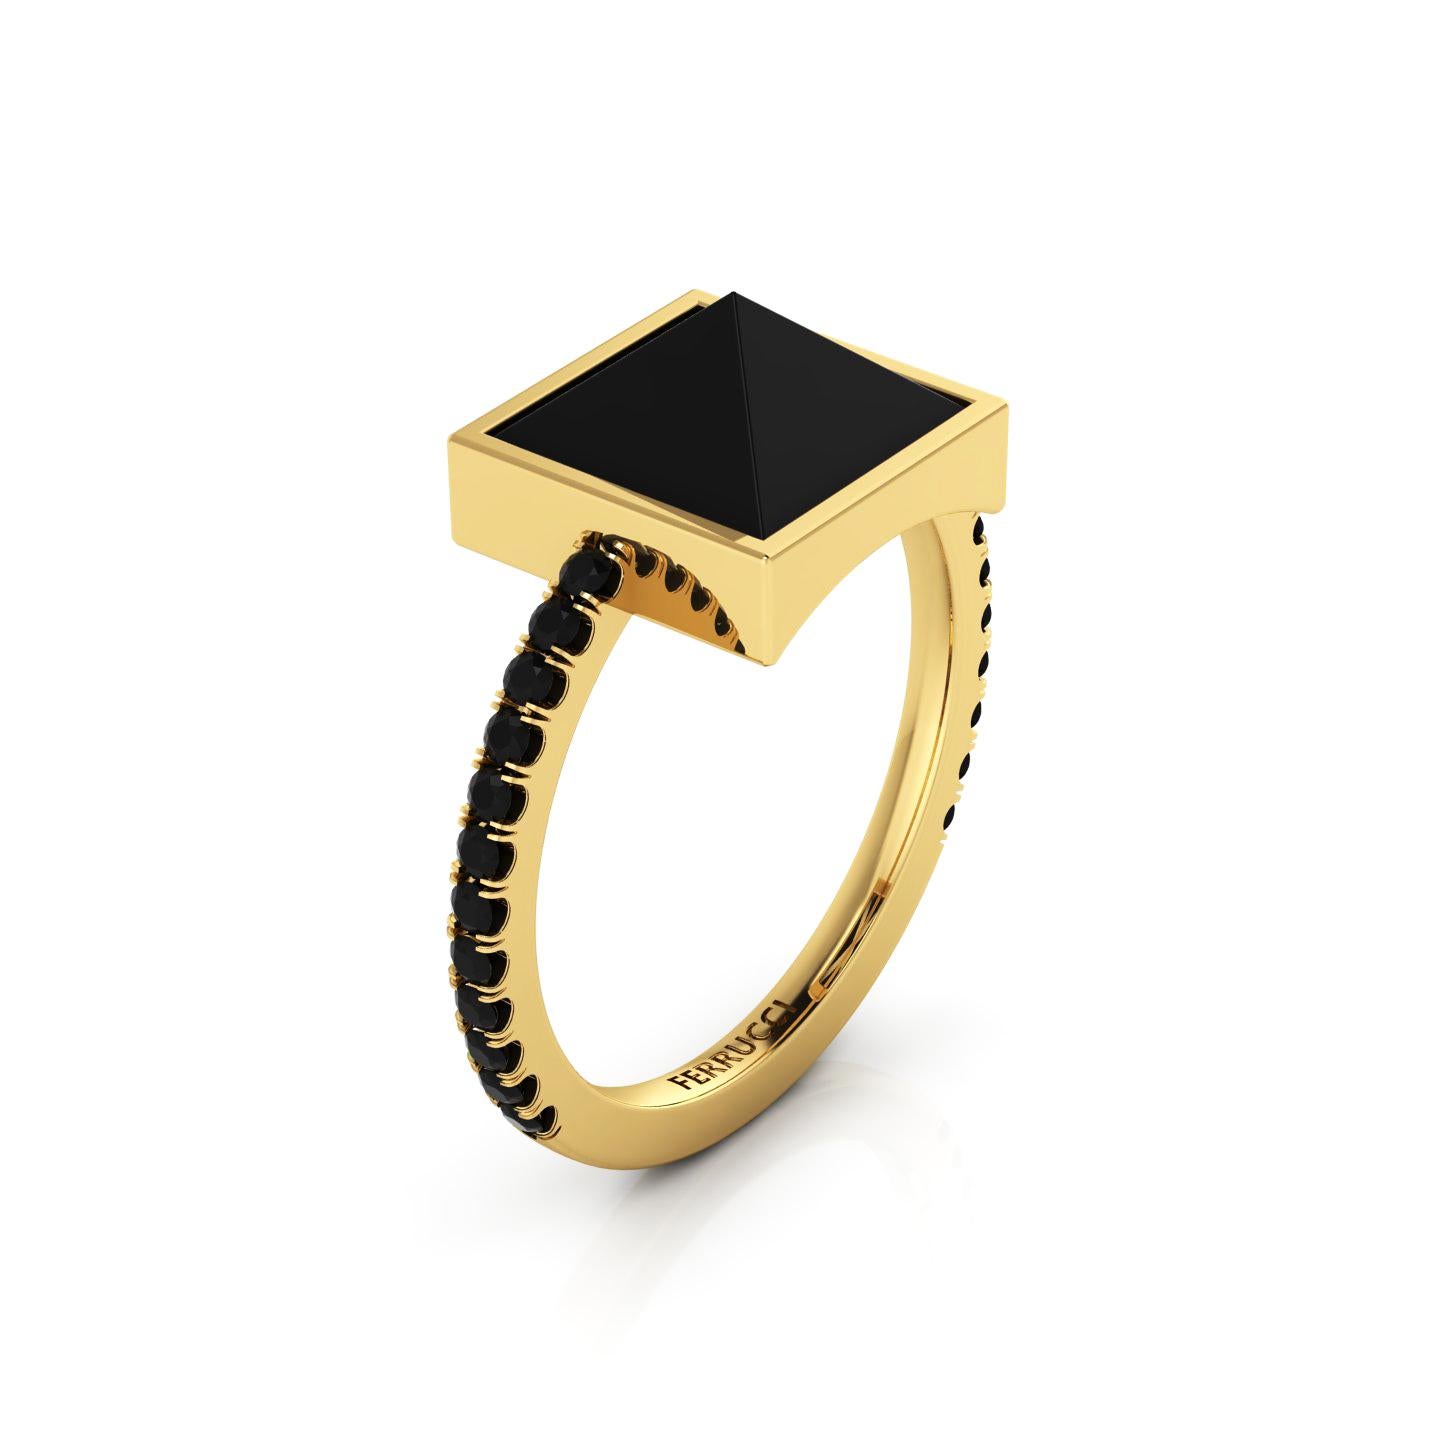 Pyramids collection the Black Onyx solitaire ring in 18k yellow gold, with Black brilliant cut diamonds for an approximate total weight of 0.30 carats, made in New York.

Onyx is believed to offer personal protection and relationship harmony and The